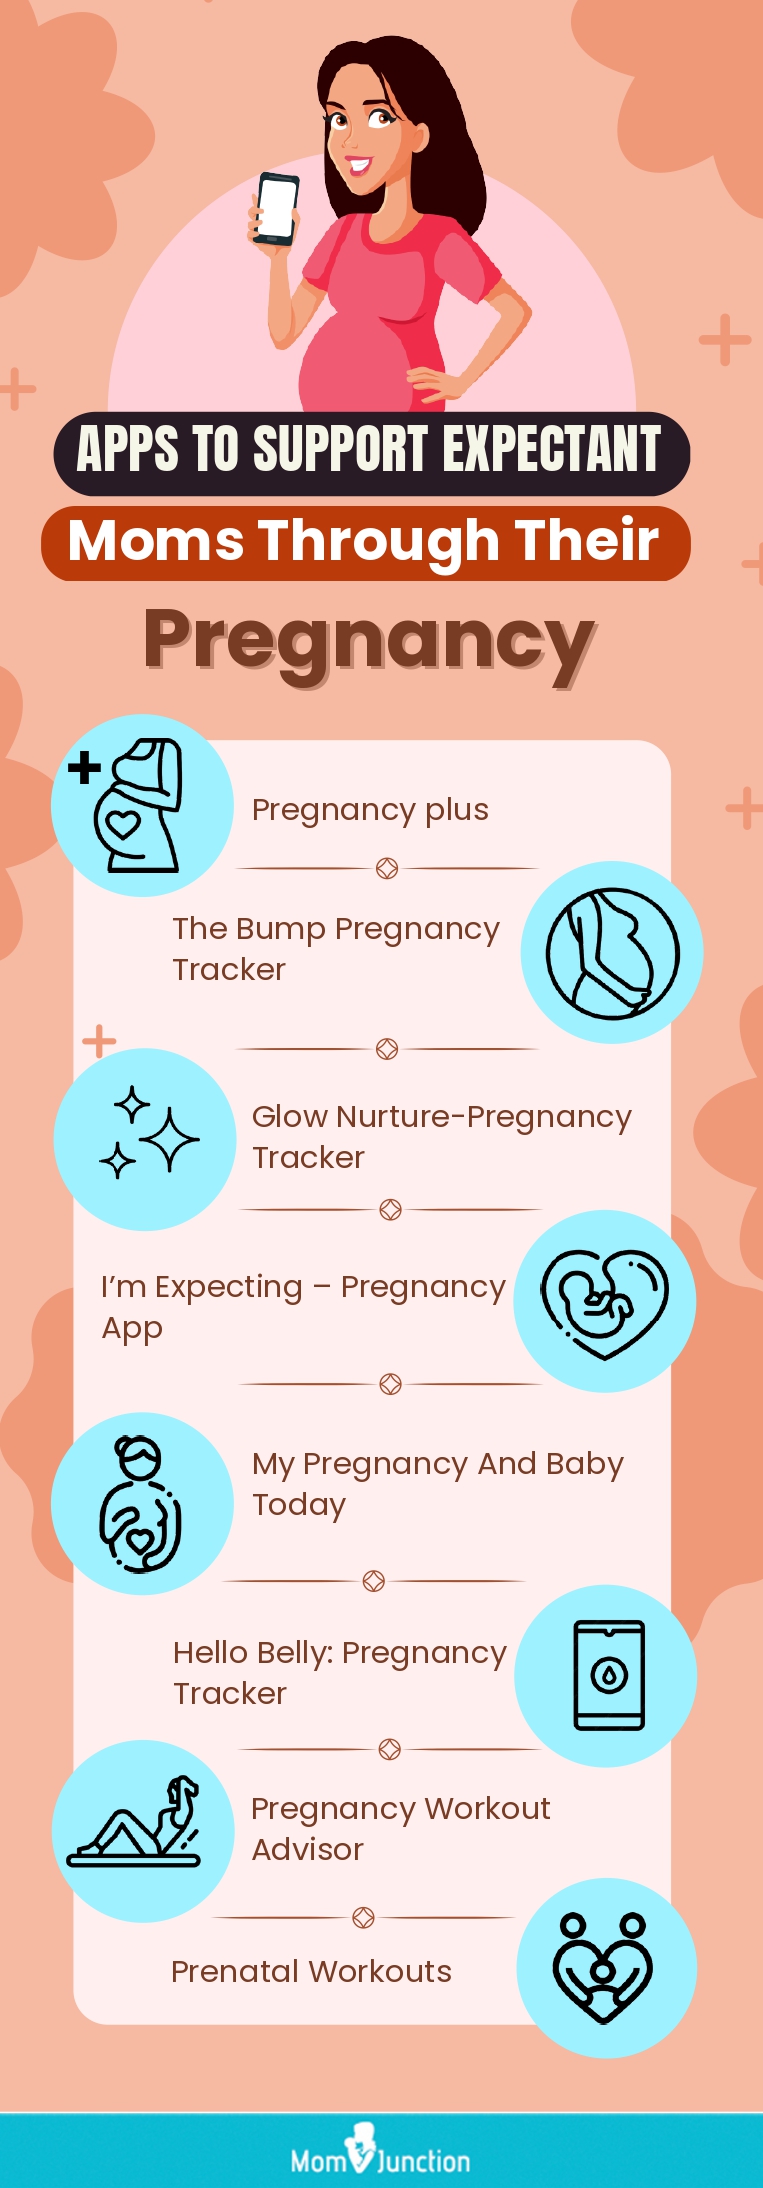 apps to support expectant moms through their pregnancy (infographic)